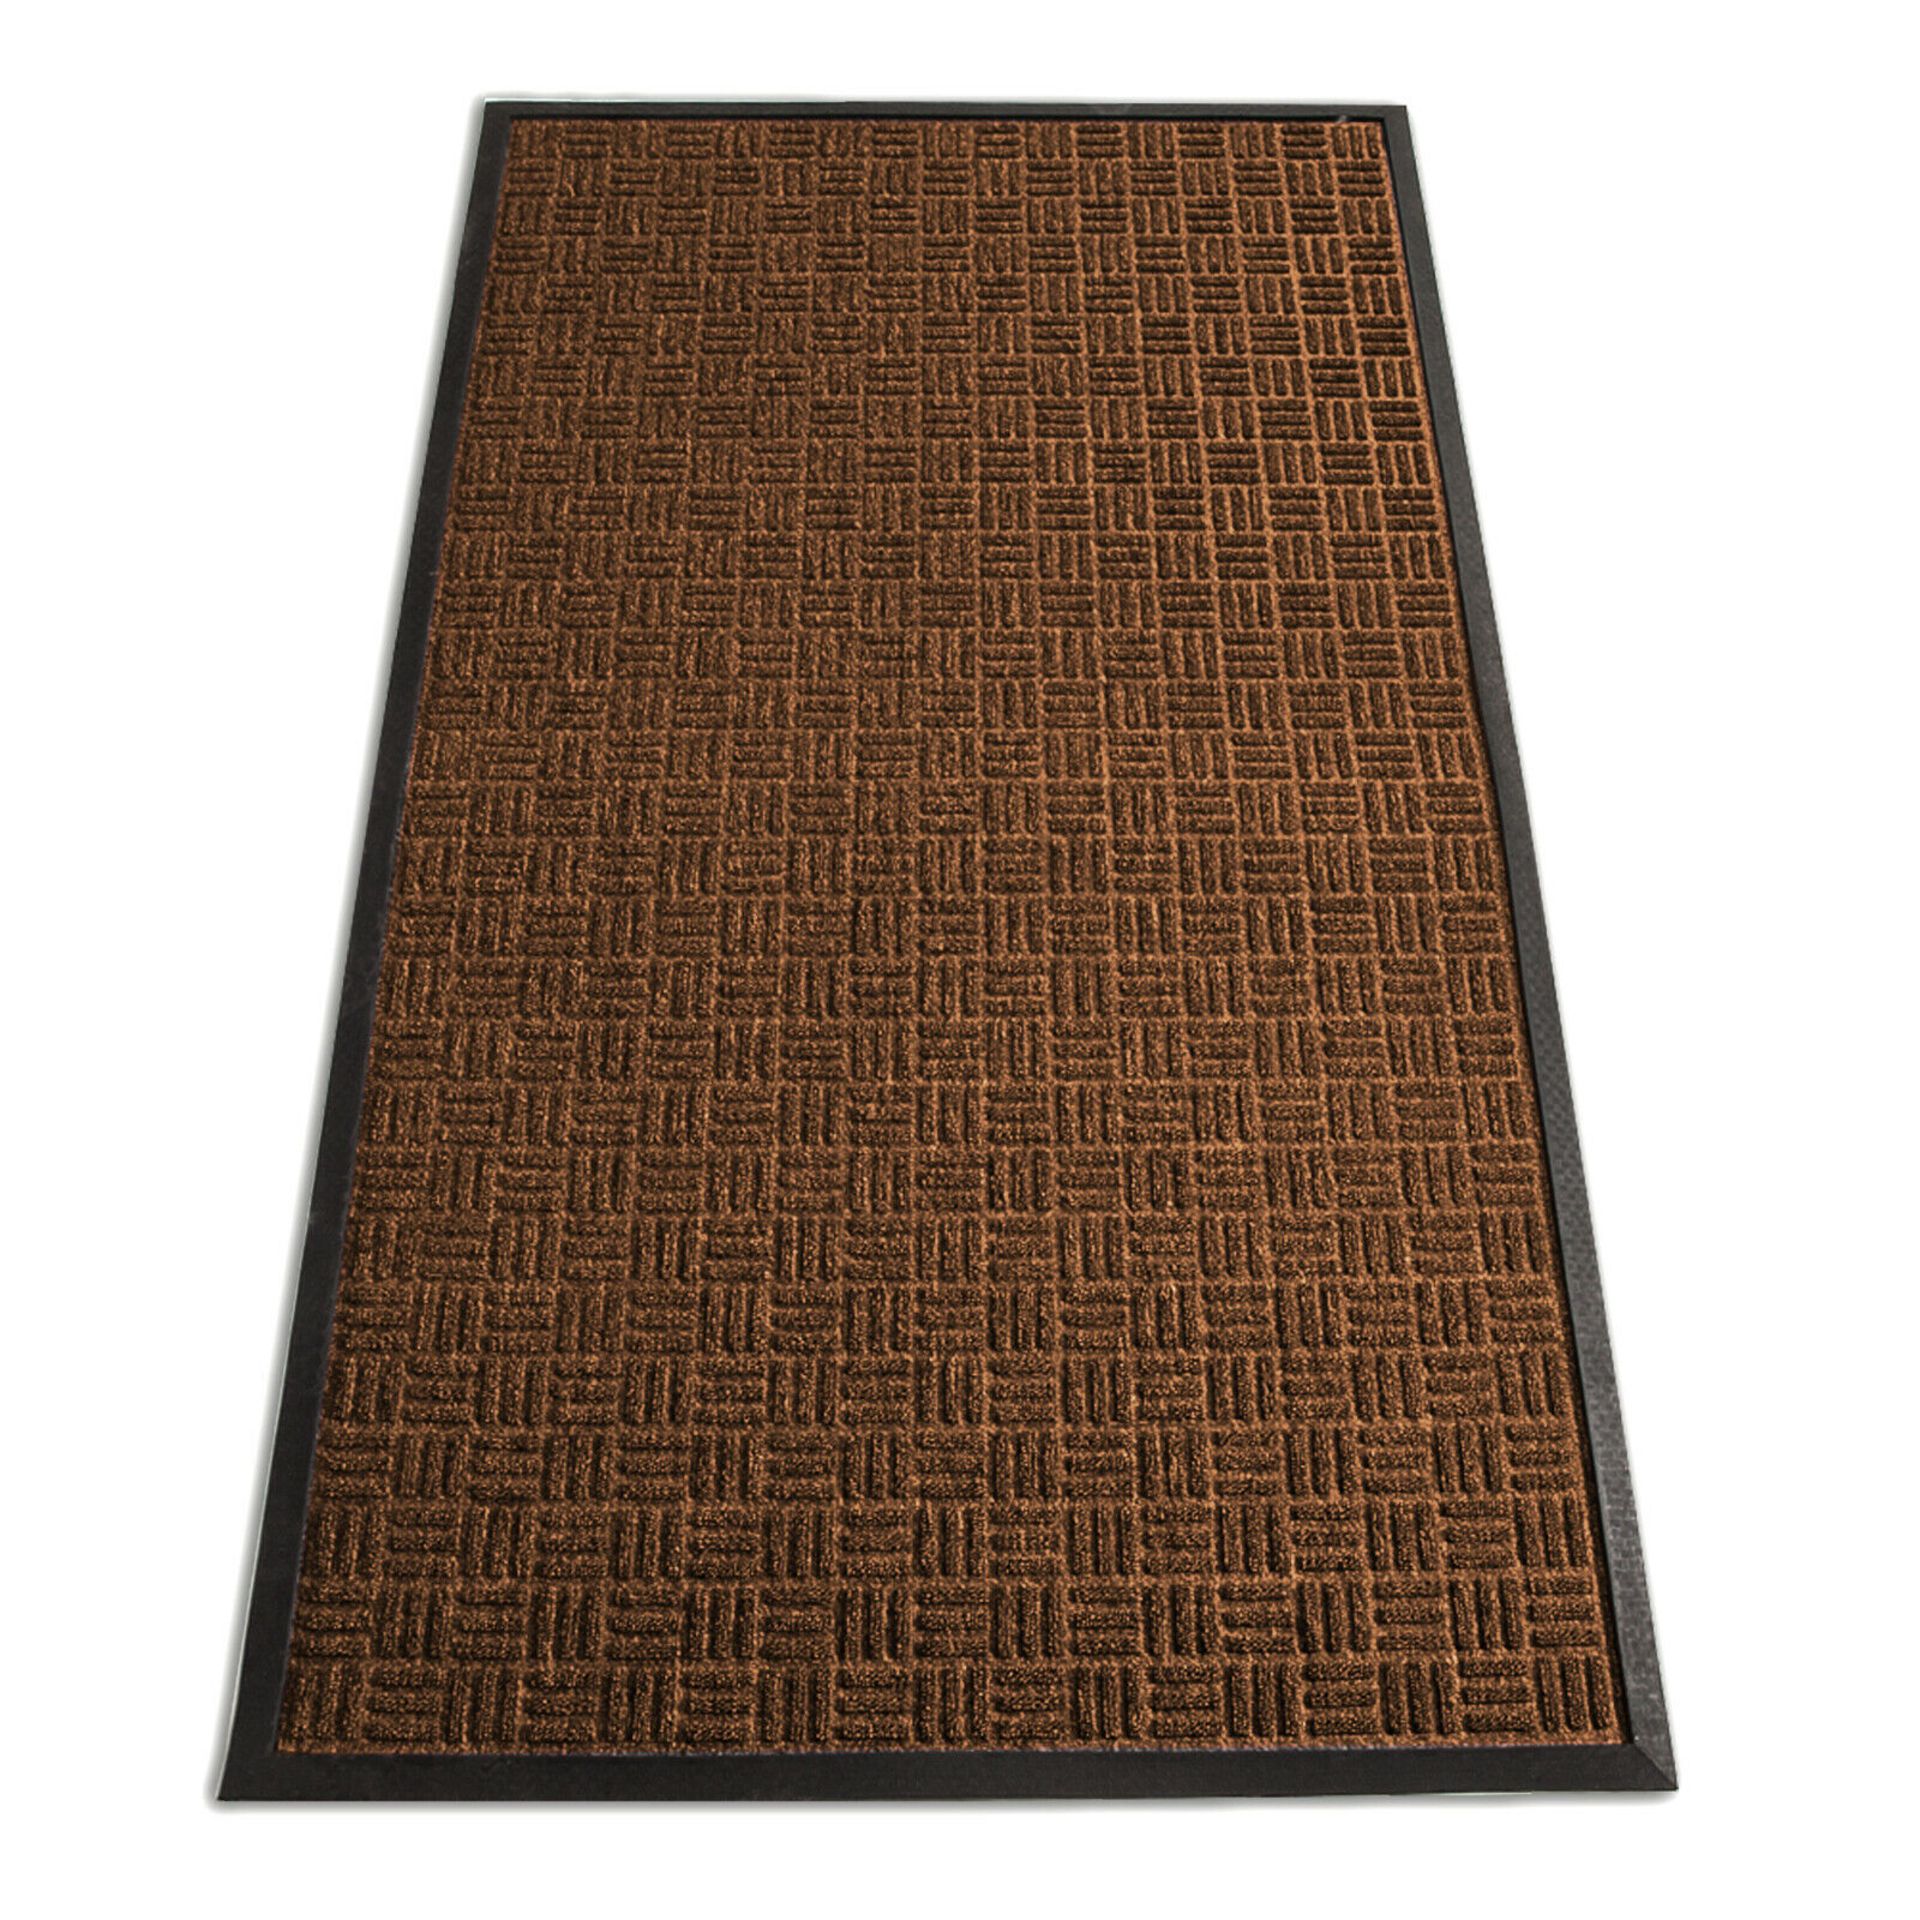 V Brand New Brown Heavy Duty Commercial Grade Mat ISP £114 (AJ Products) 120cm x 180cm (4ftx6ft